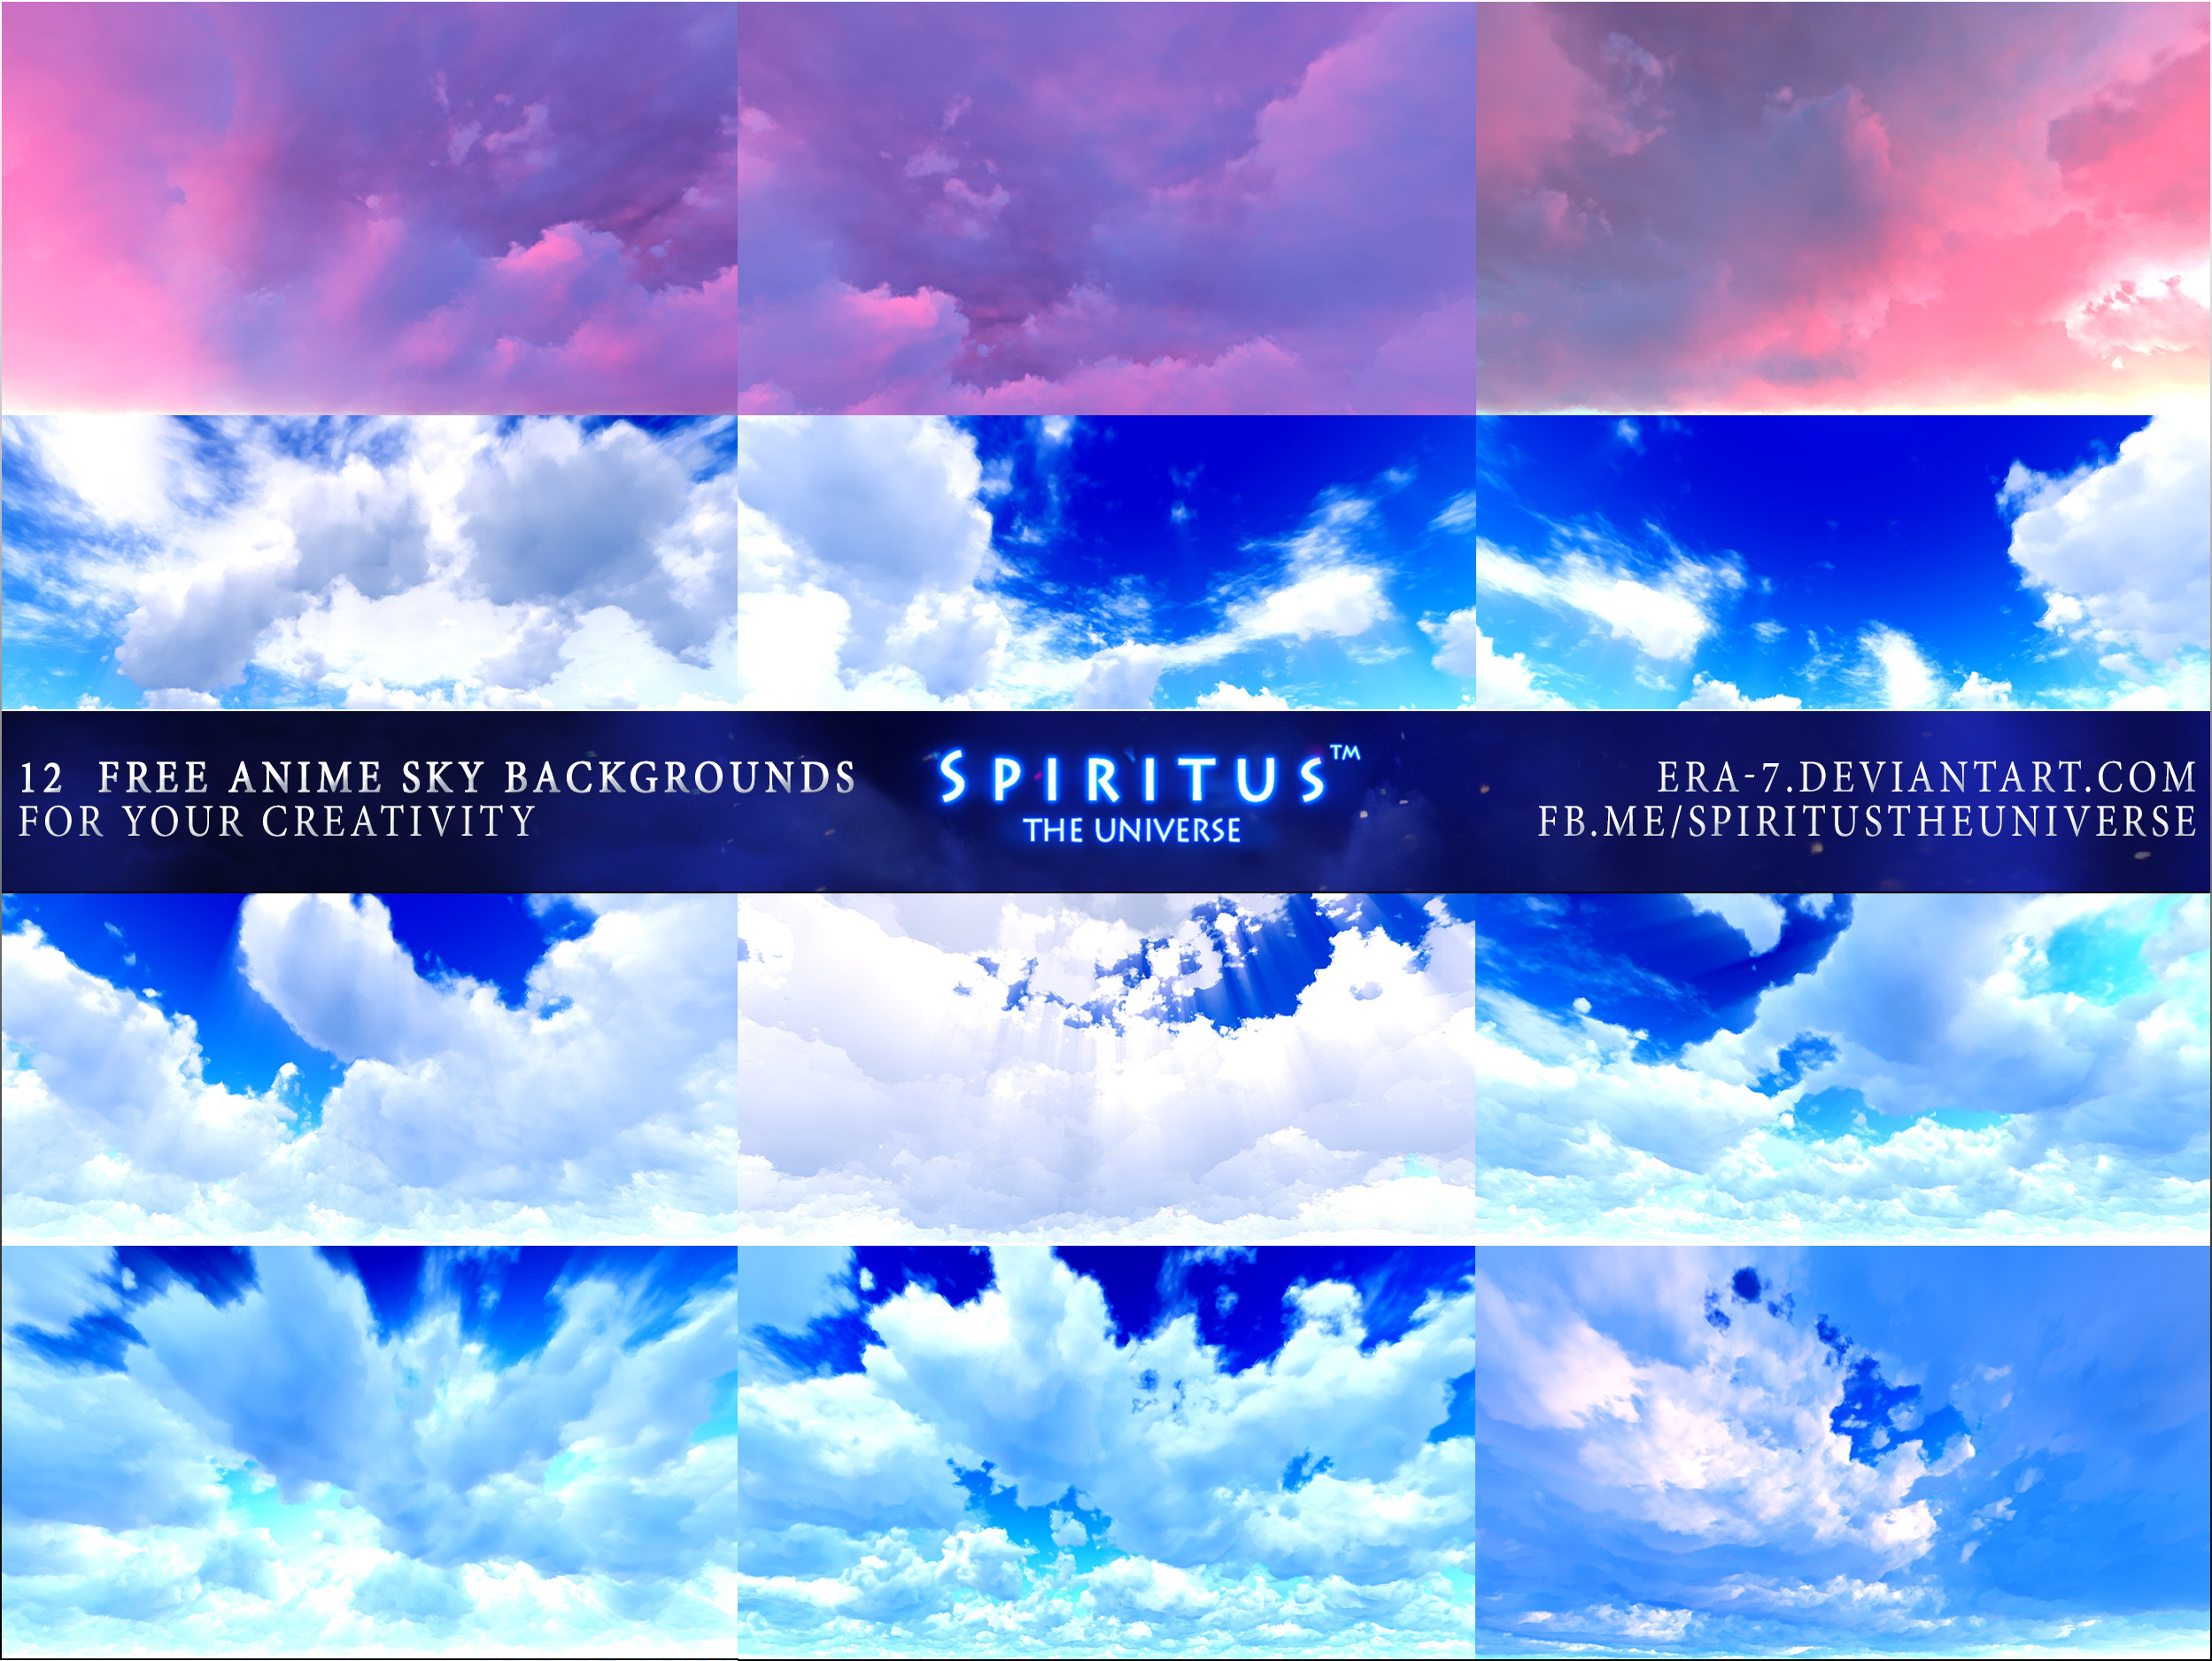 2498x1876 ... 12 FREE ANIME SKY BACKGROUNDS - PACK 6 by ERA-7